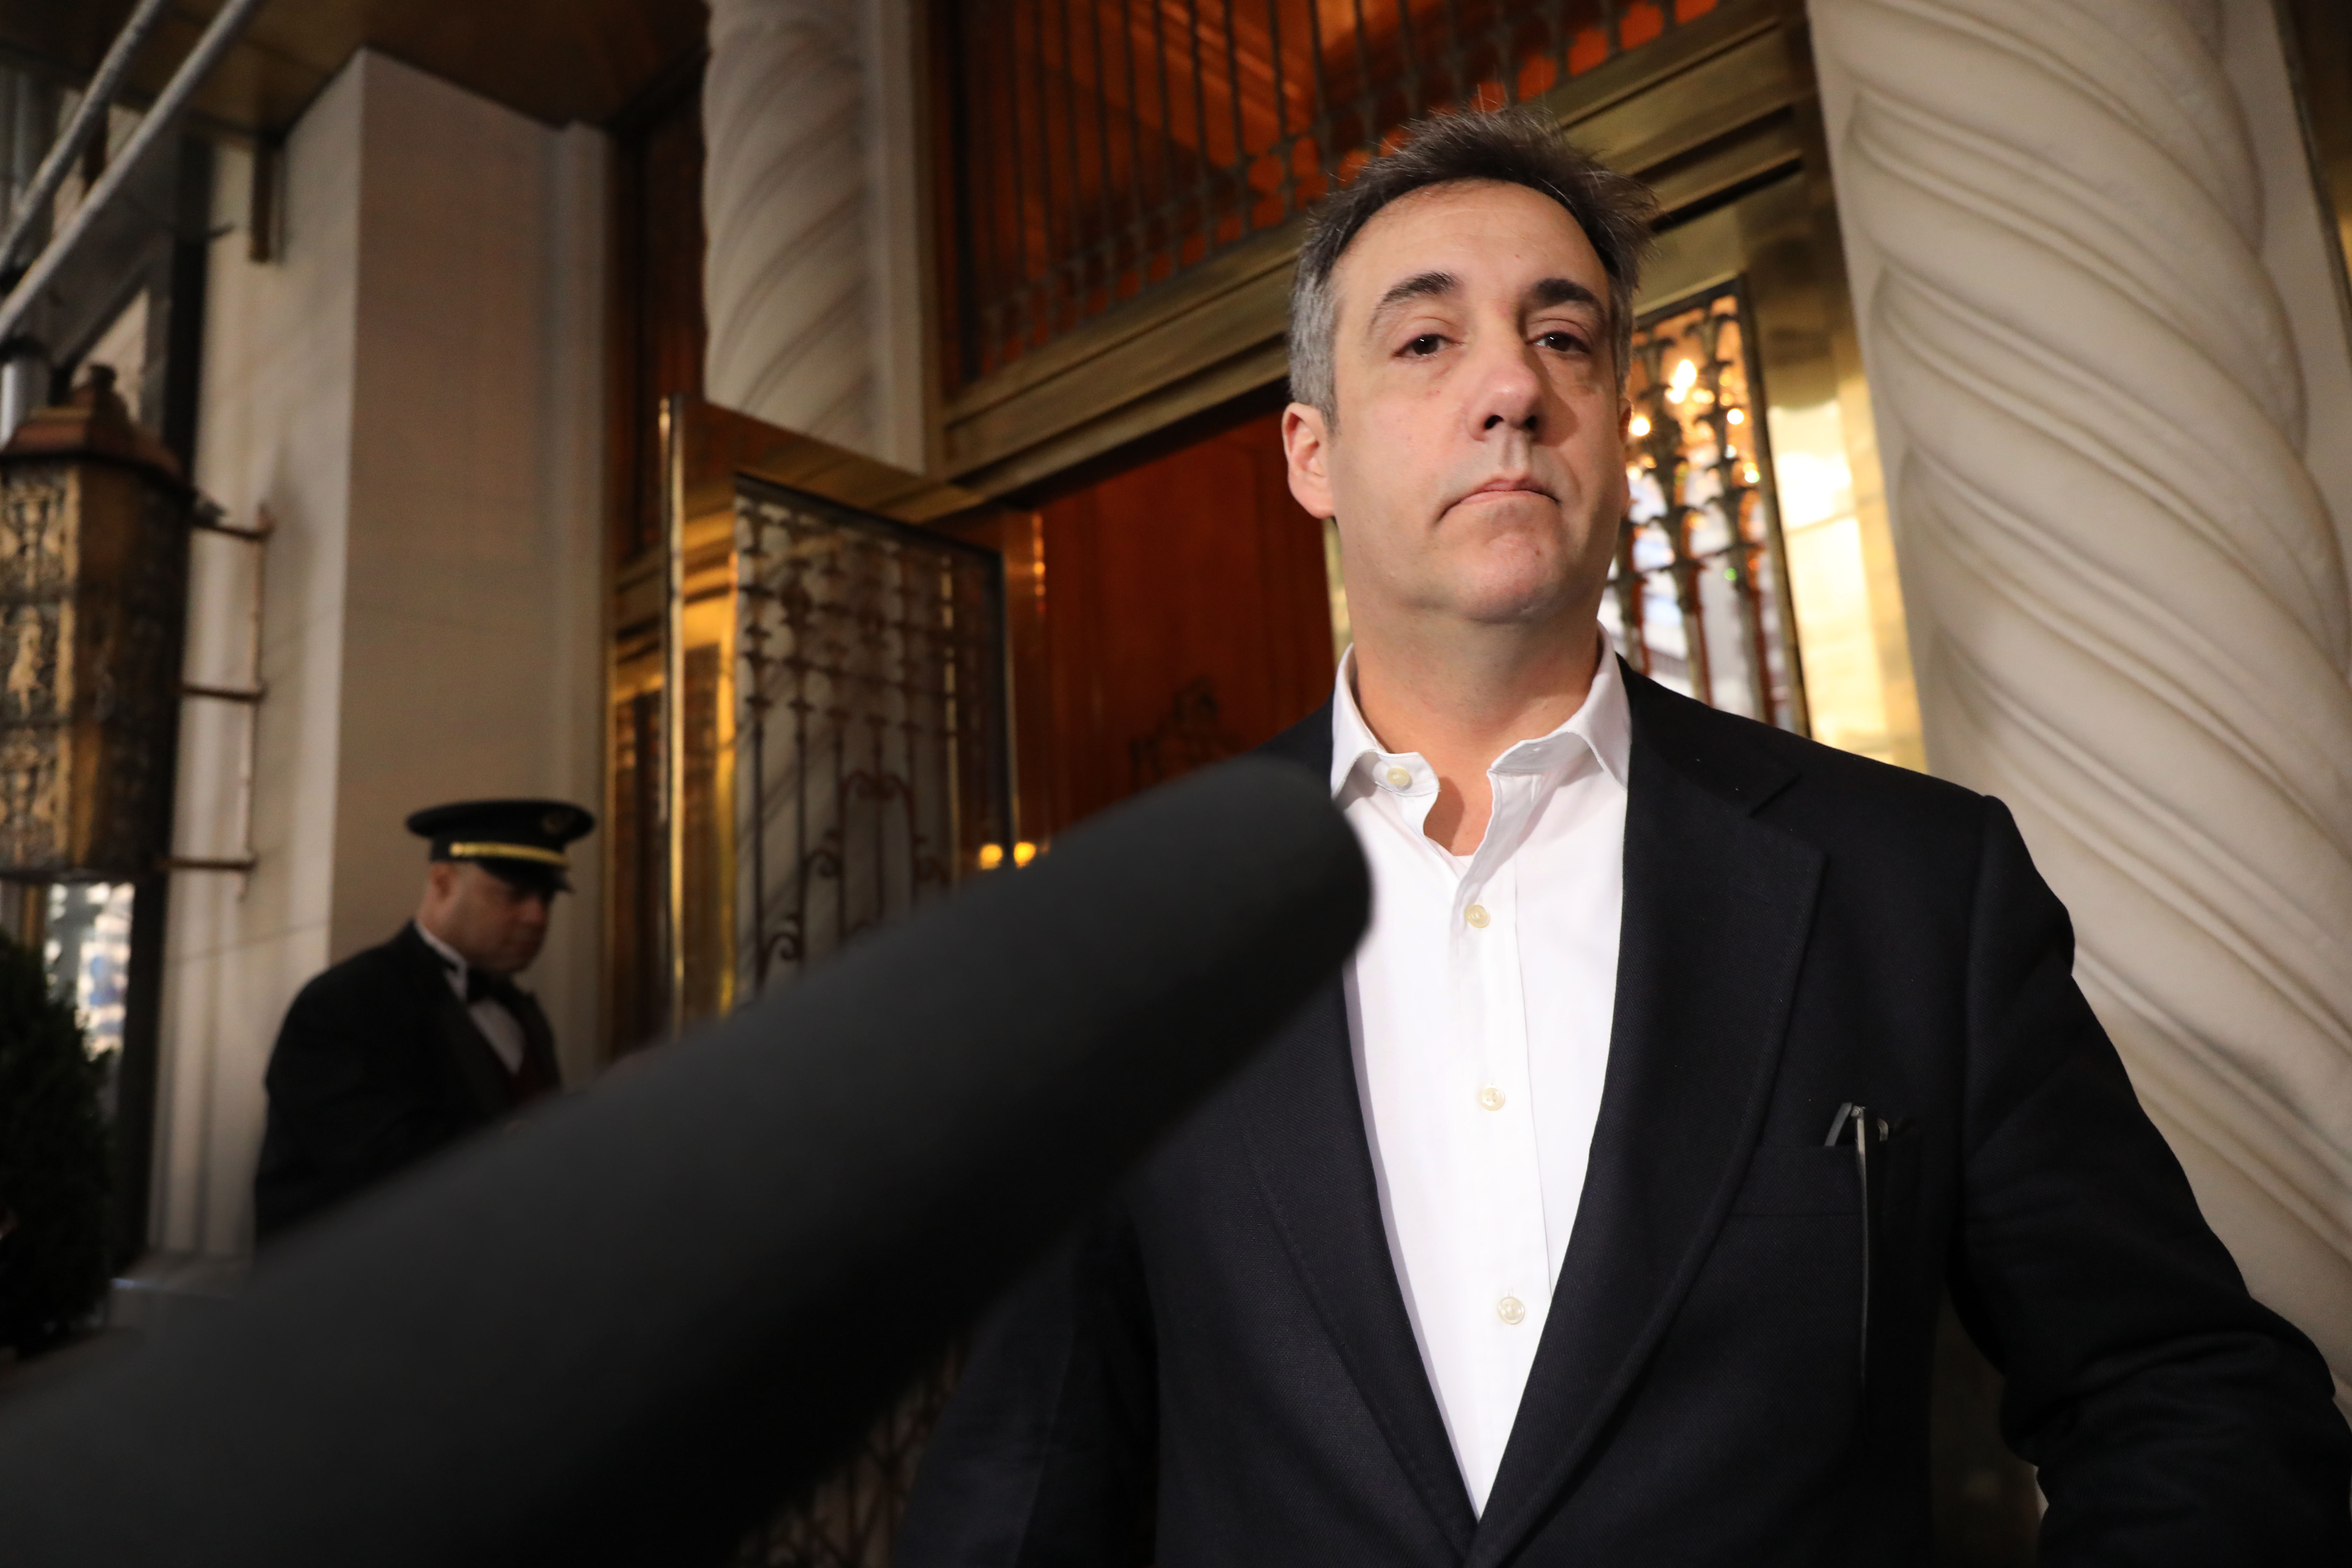 Michael Cohen in front of a microphone.